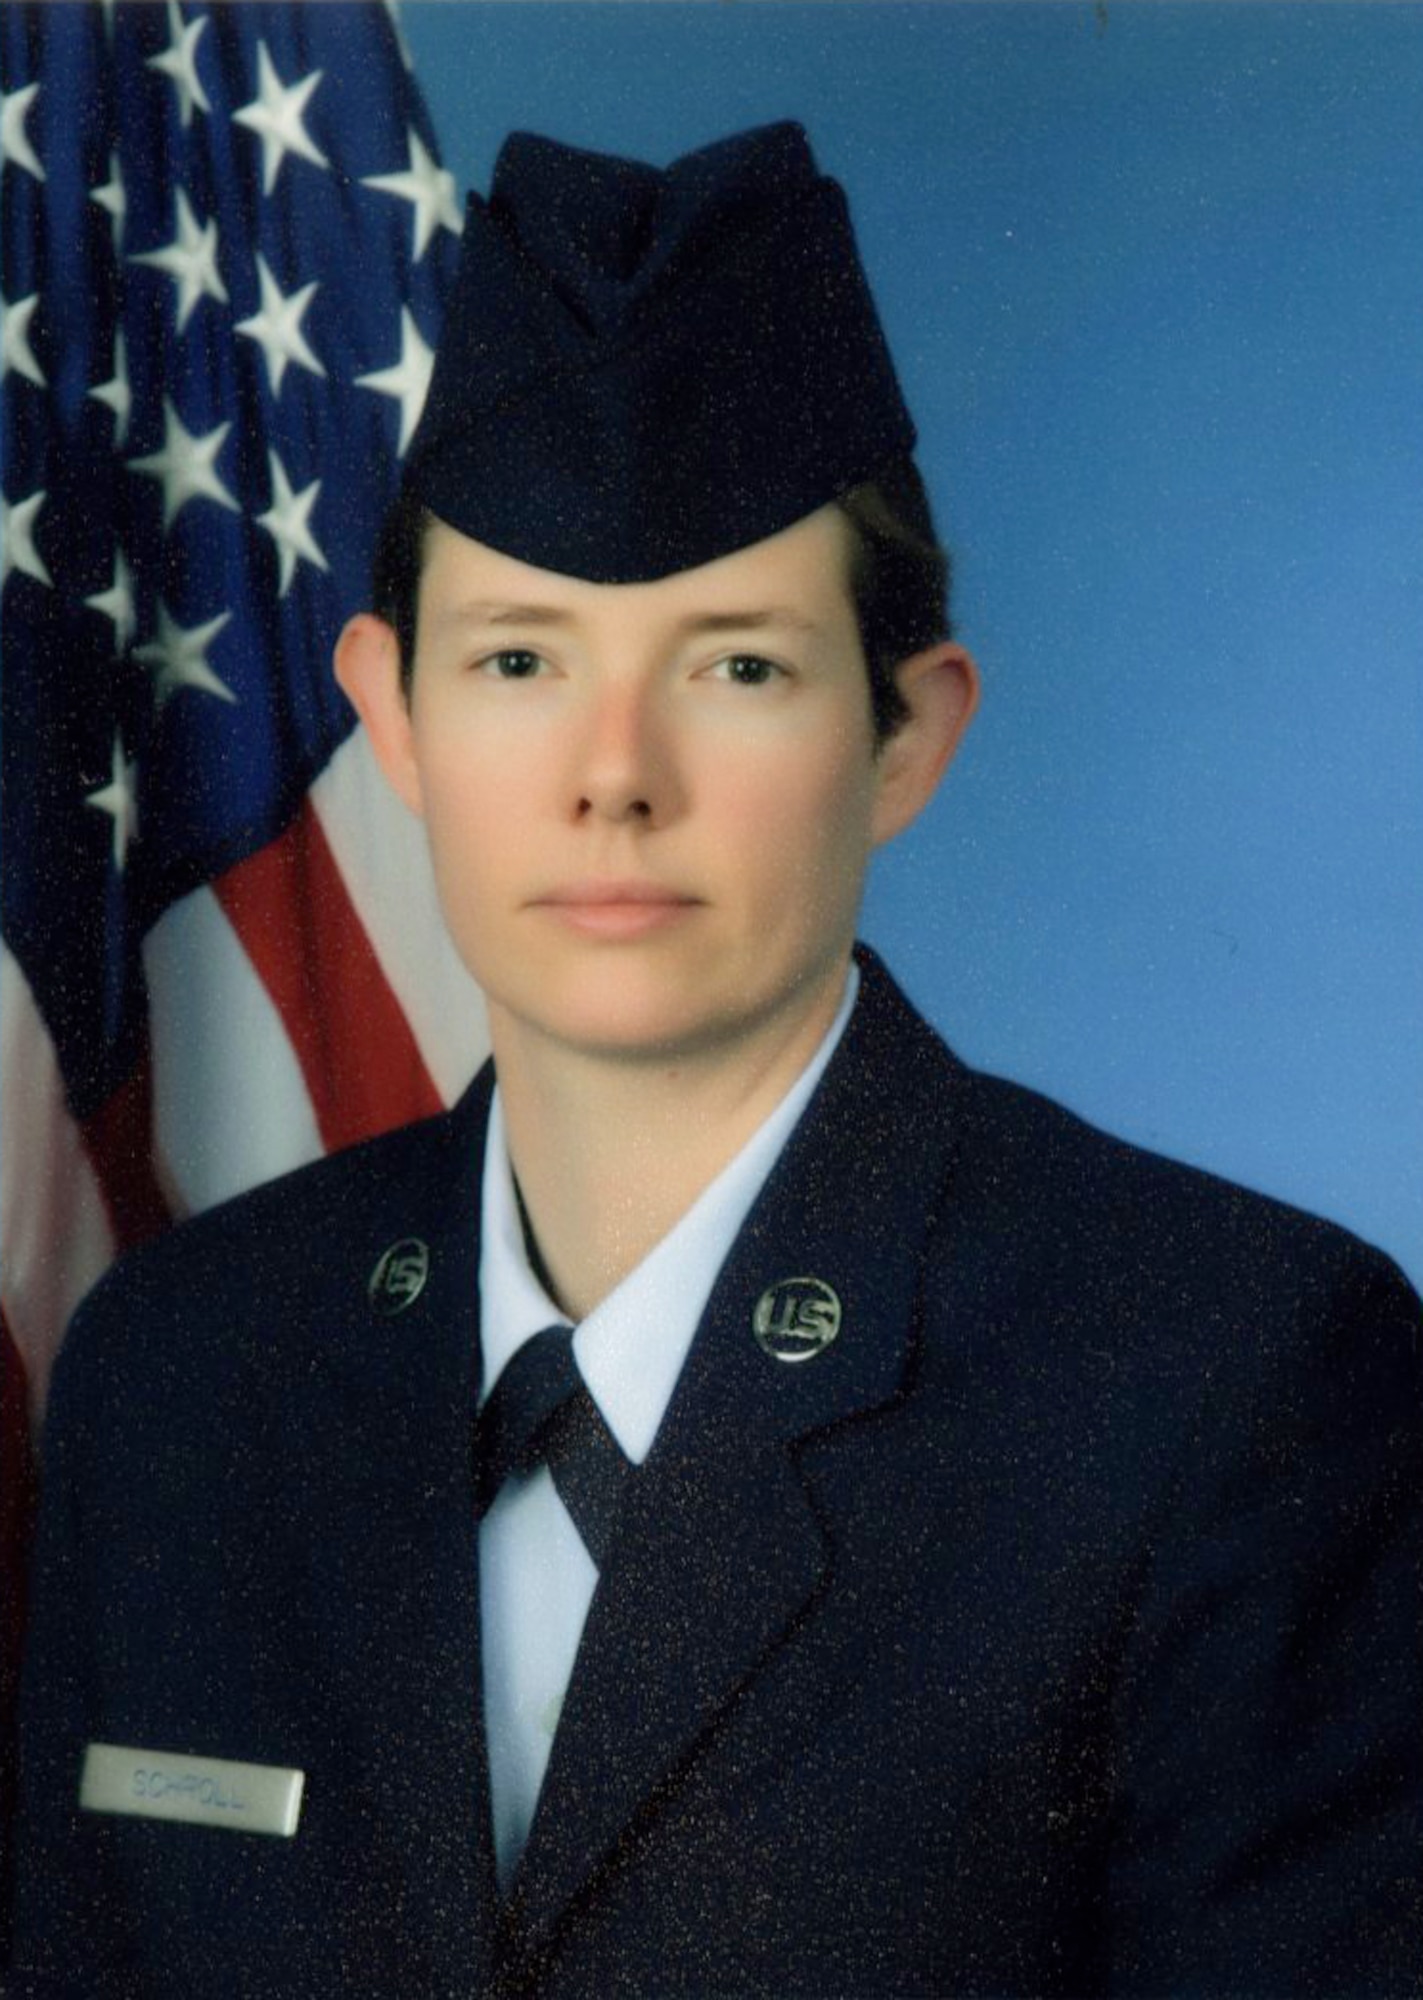 Air Force Basic Training graduation photo of Airman 1st Class Cynthia A. Schroll.  Schroll is a radiochemistry technician at the Air Force Technical Applications Center, Patrick AFB, Fla.  (Courtesy photo)